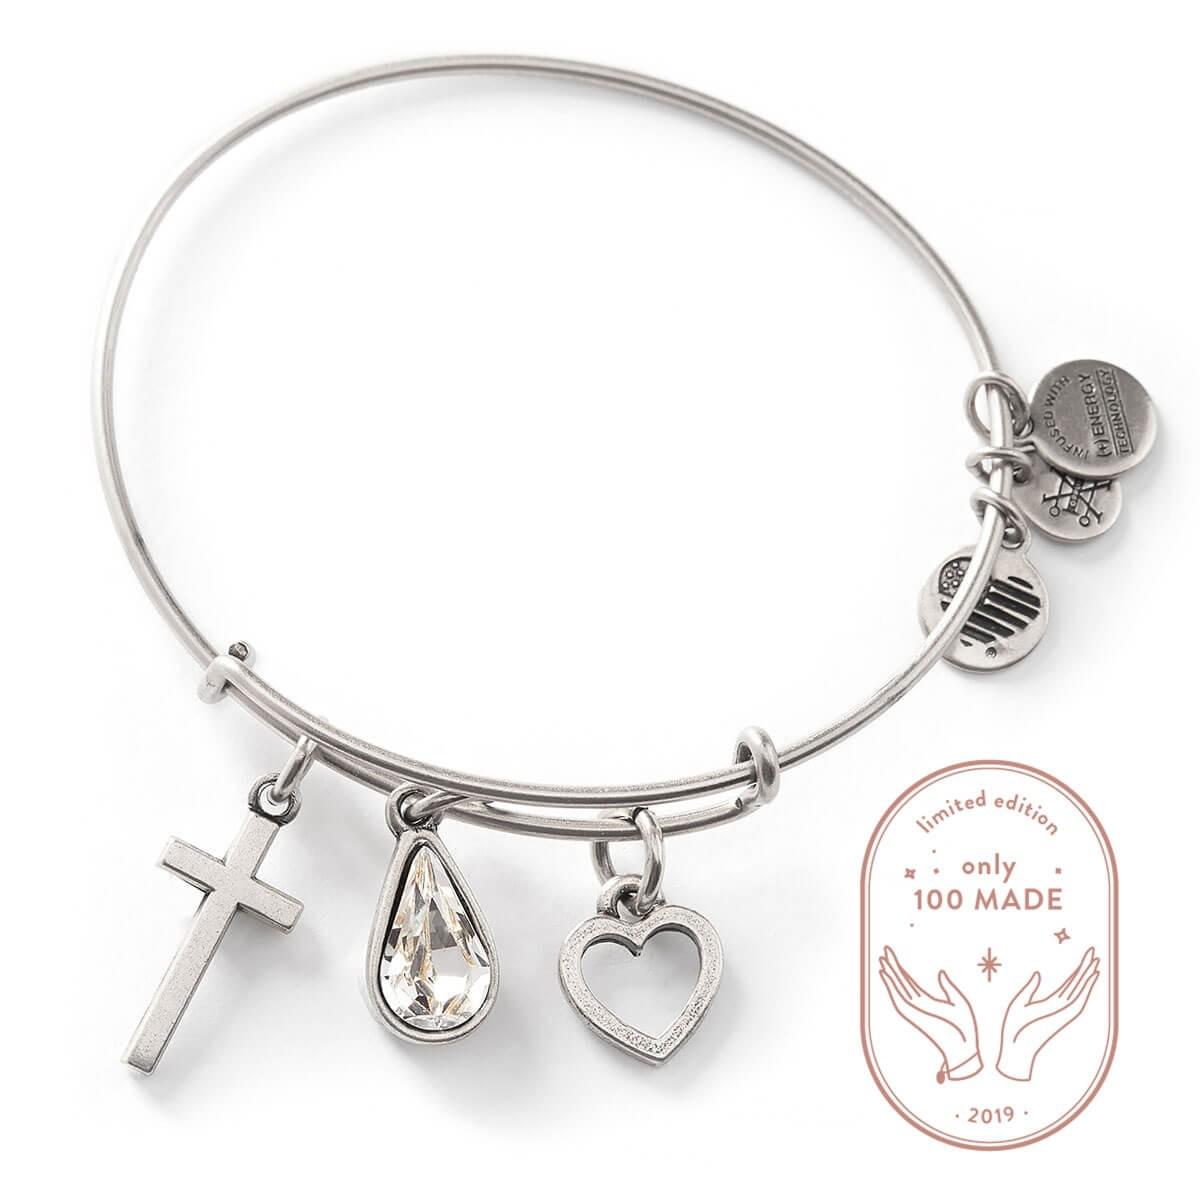 Lyst - ALEX AND ANI Heavenly Divine Trios Charm Bangle 100 Made in Metallic